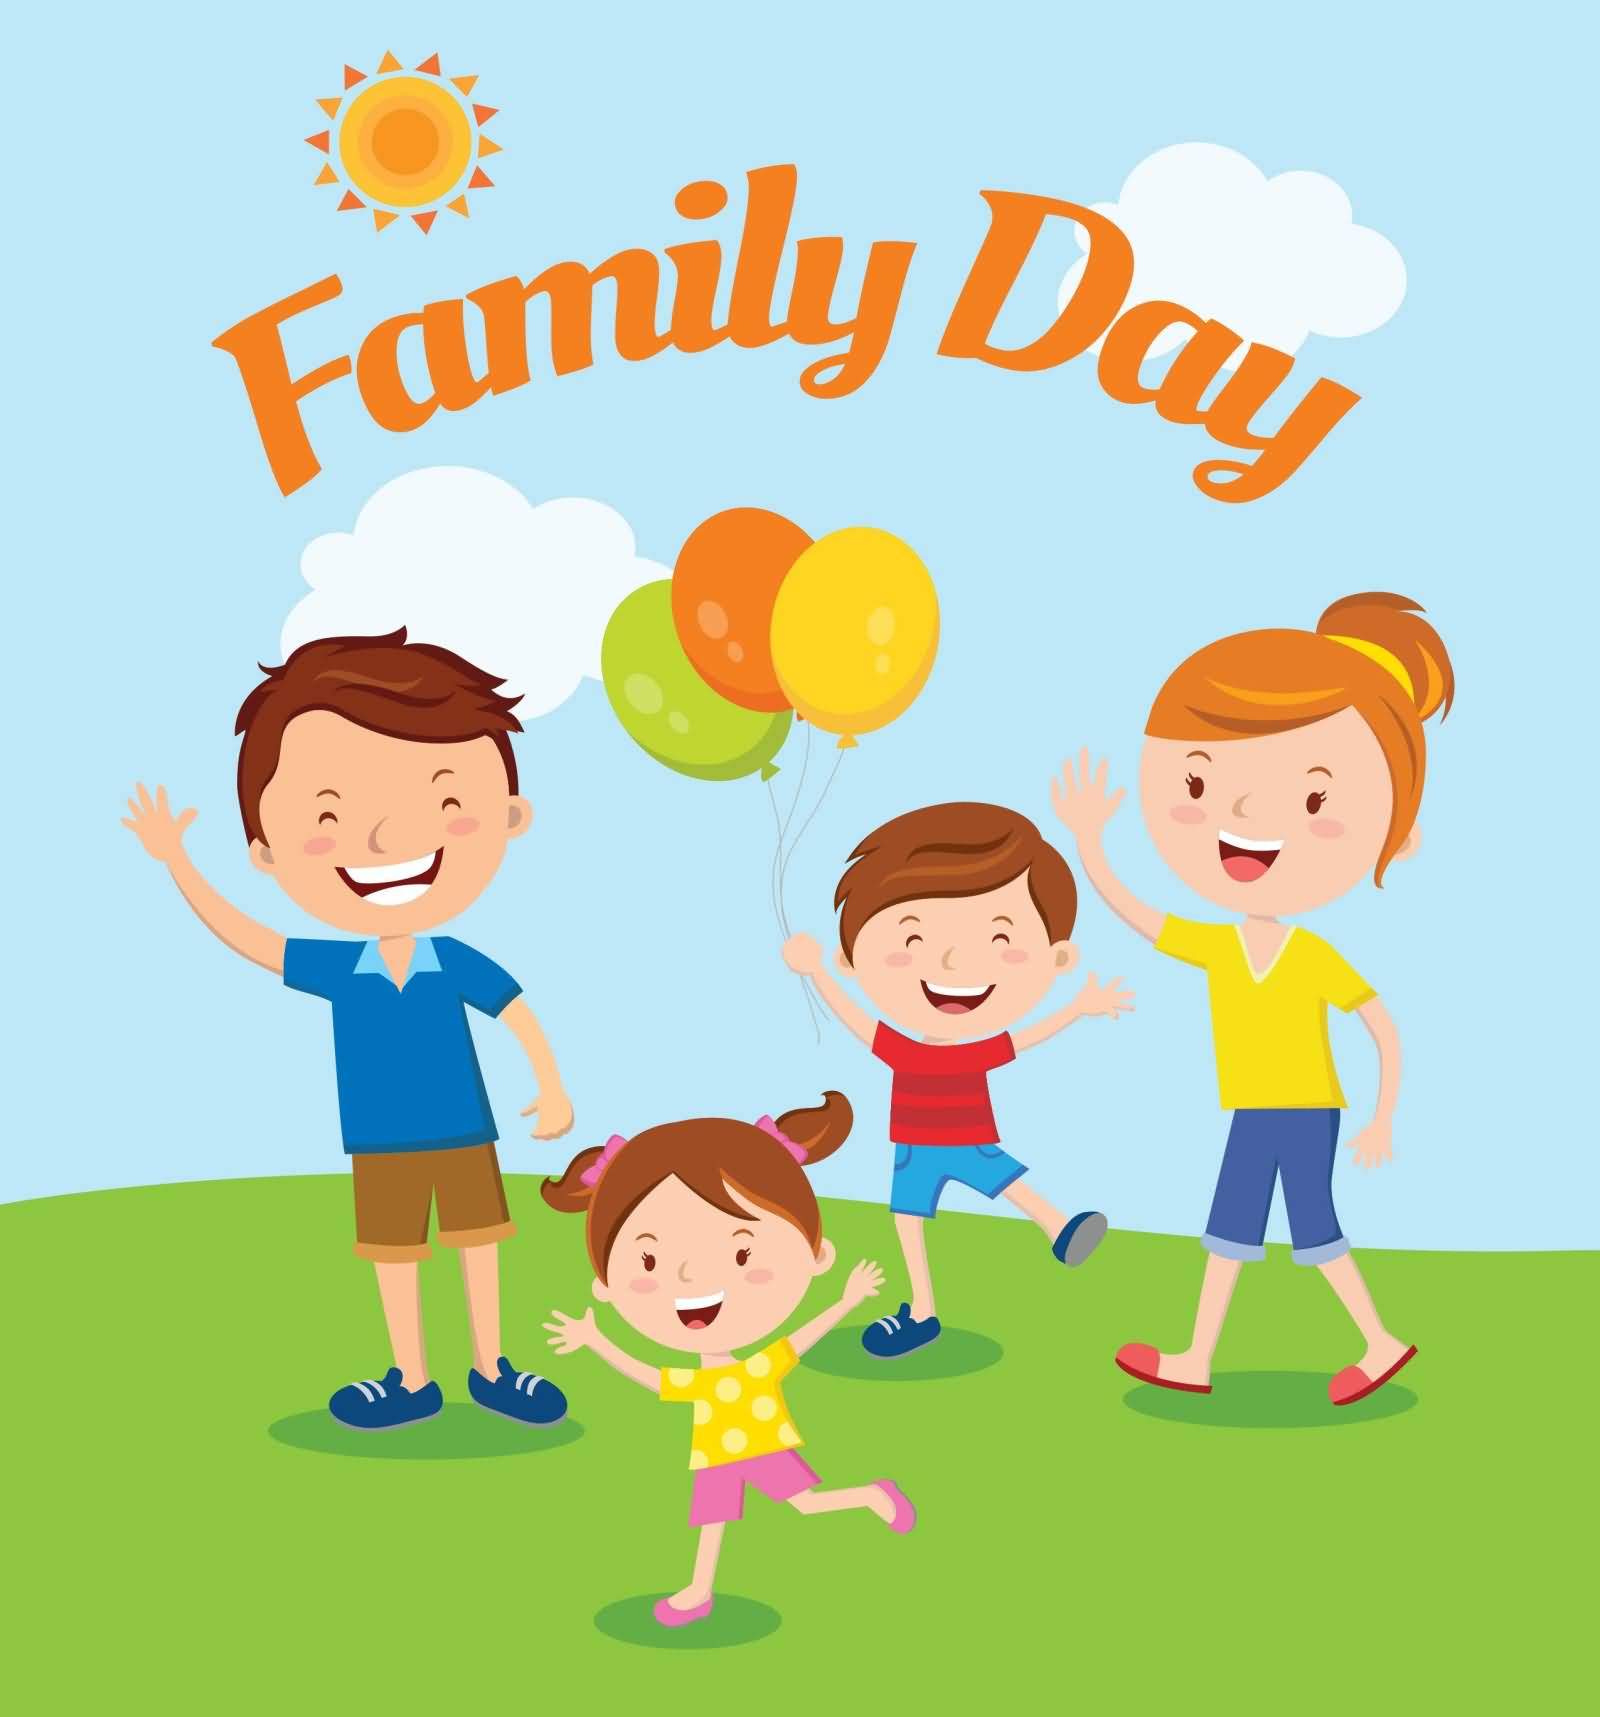 Family Day Wishes Illustration